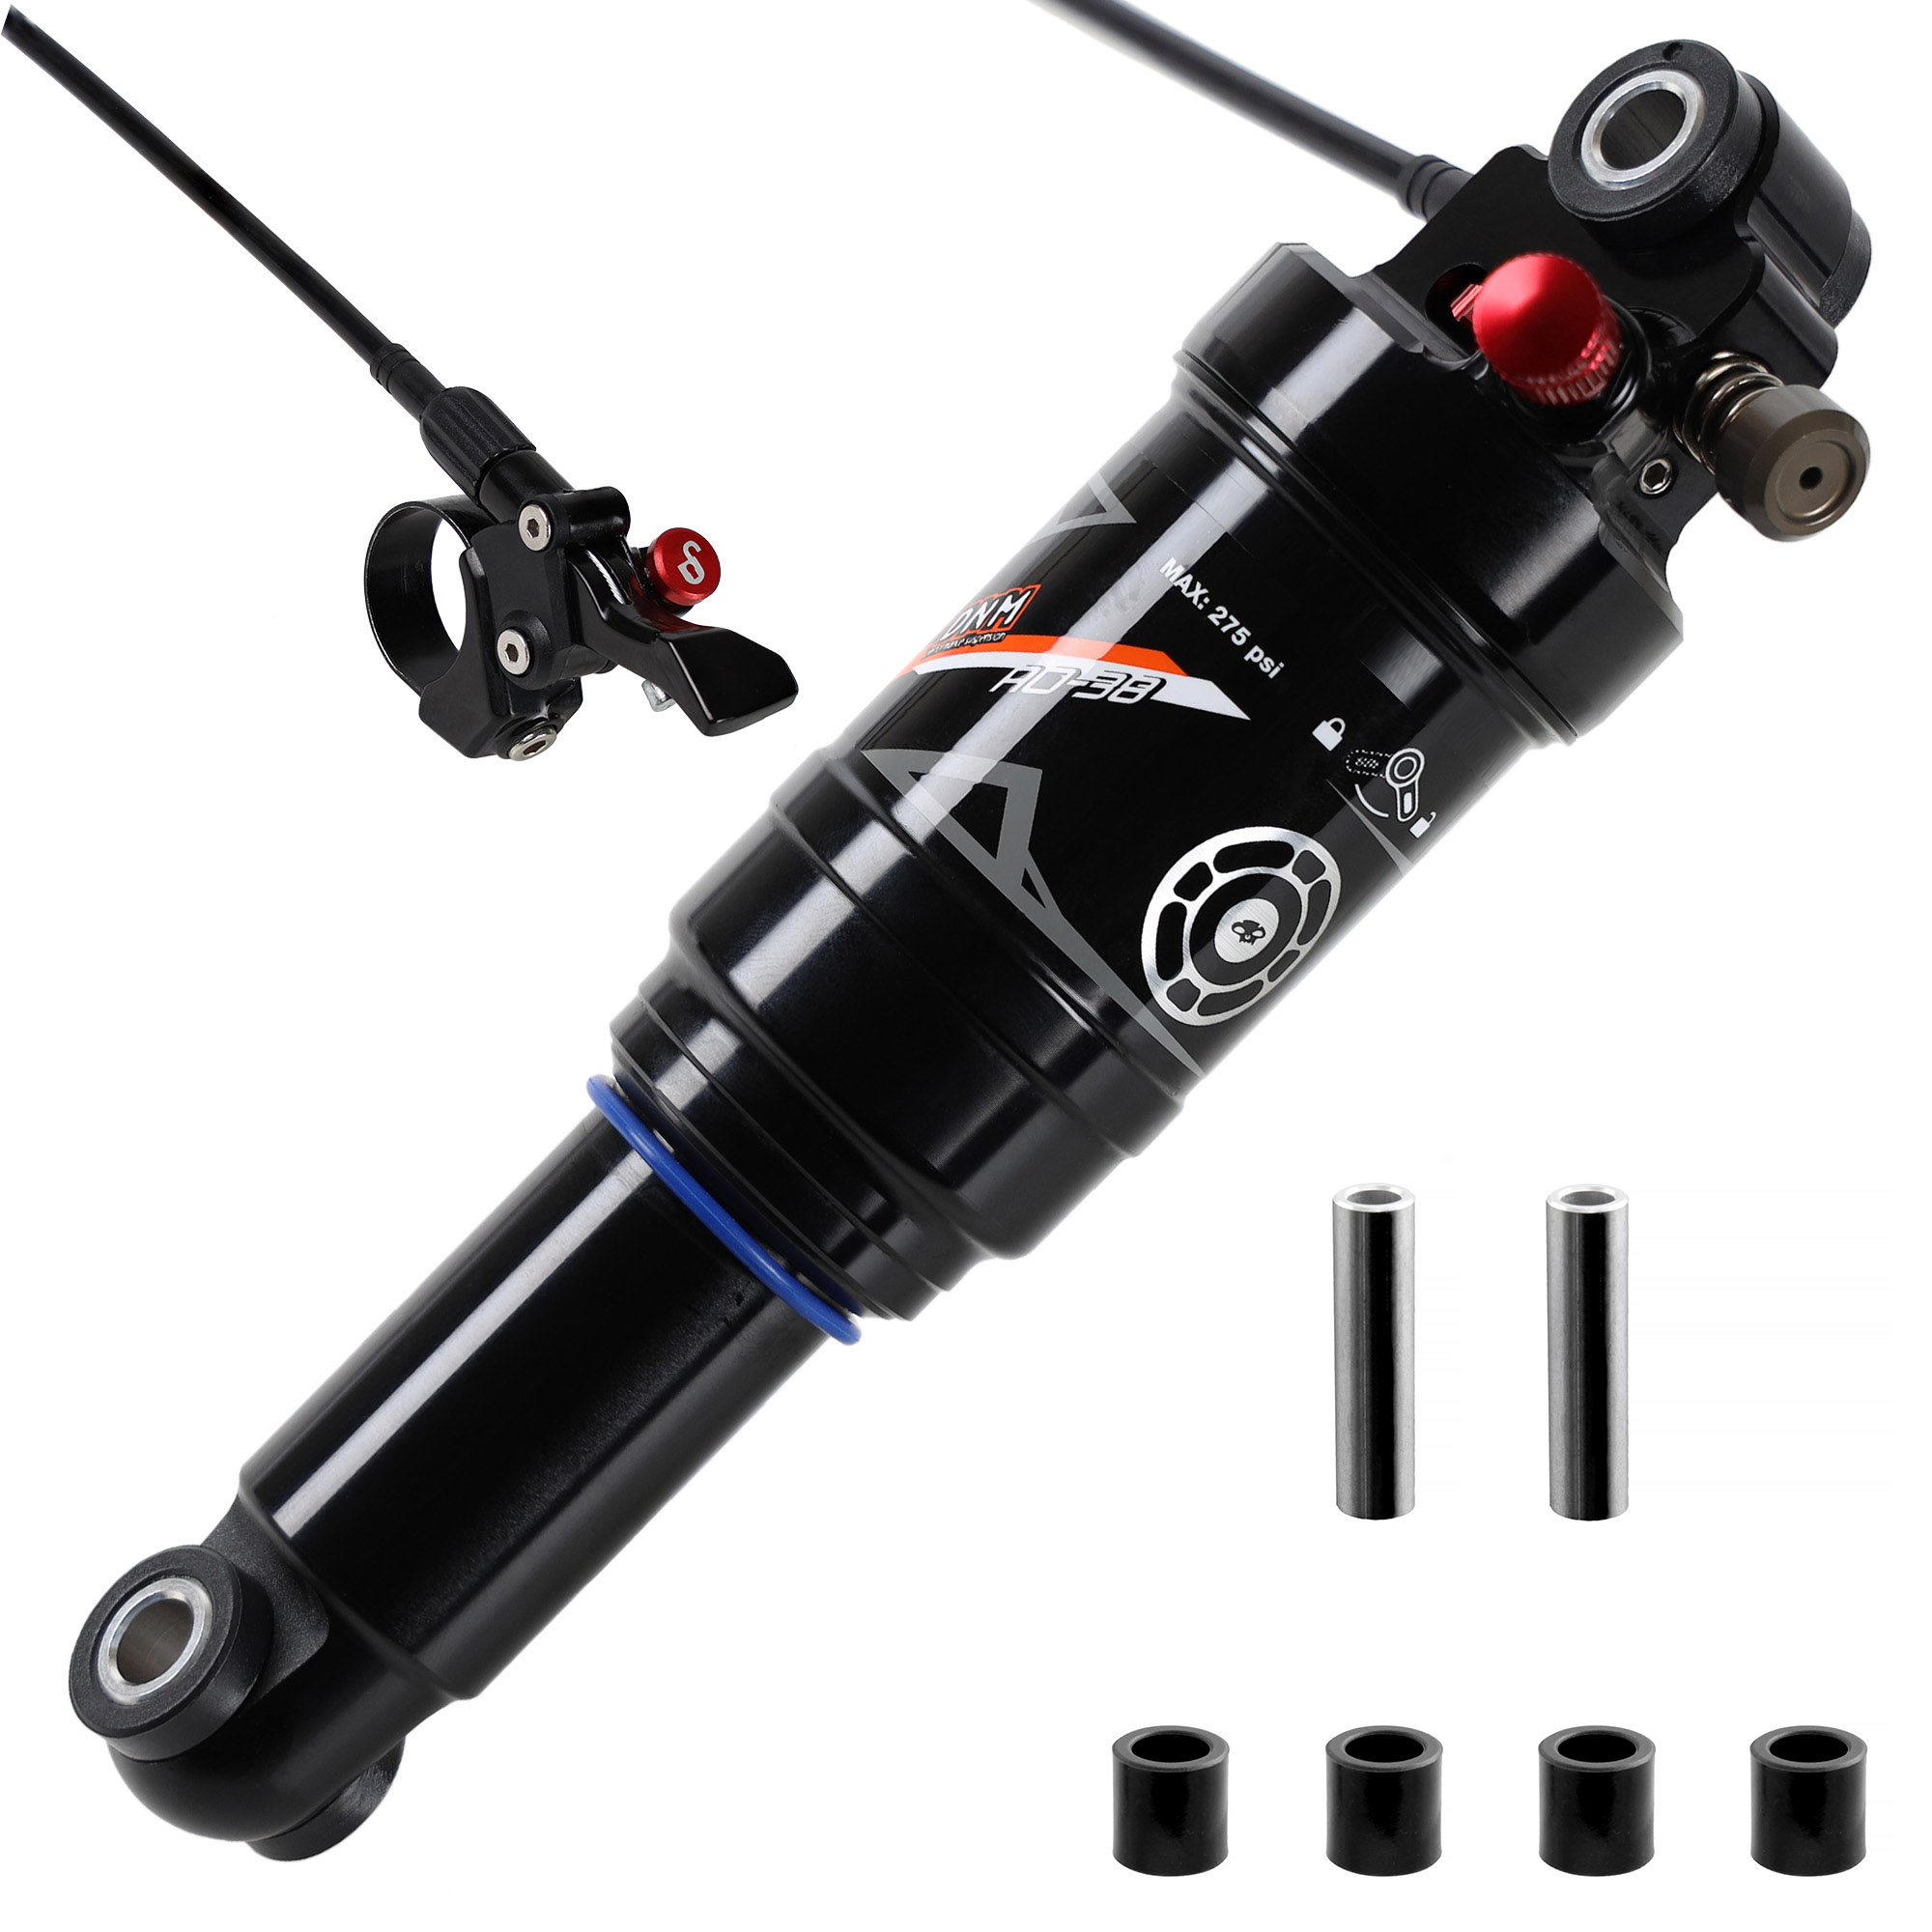 DNM AO-38RL Mountain Bike Air Rear Shock With Remote Lockout 190mm Travel 50mm